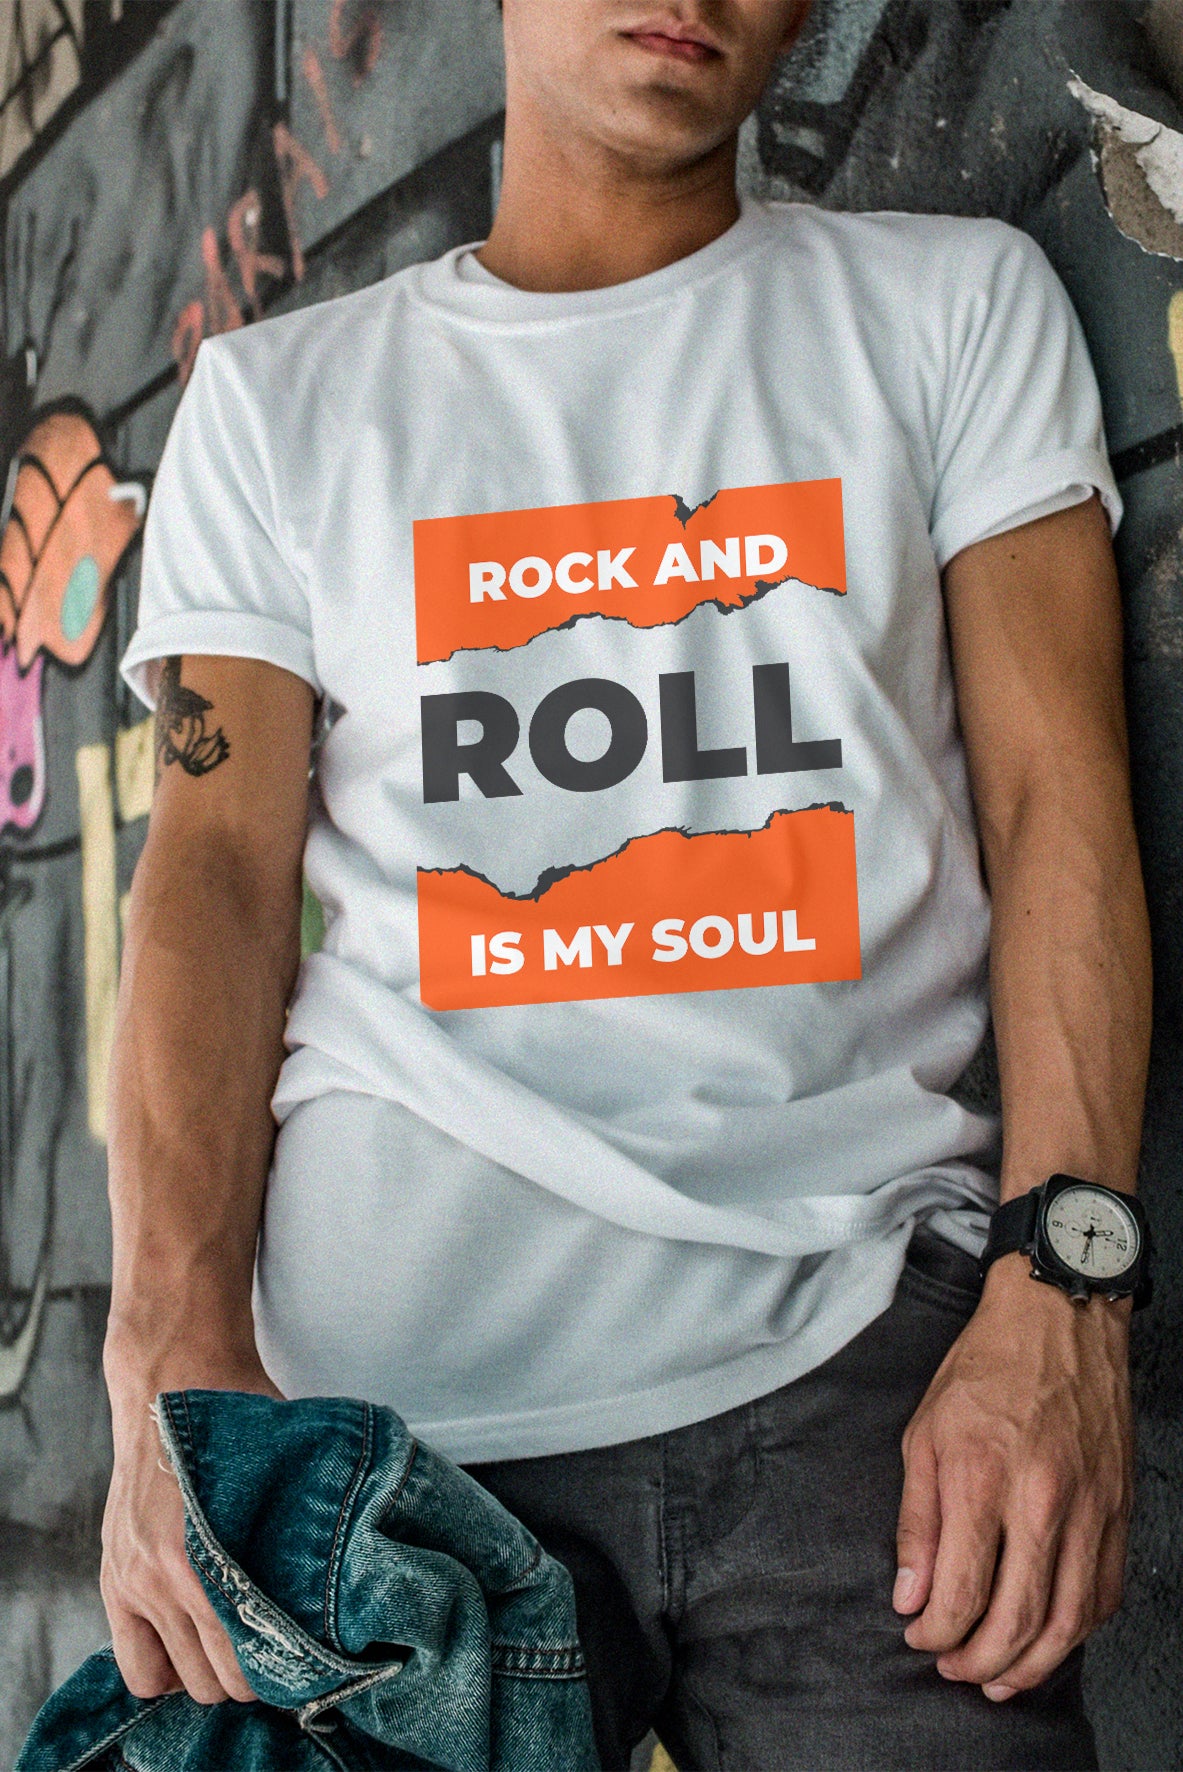 ROCK AND ROLL IS MY SOUL